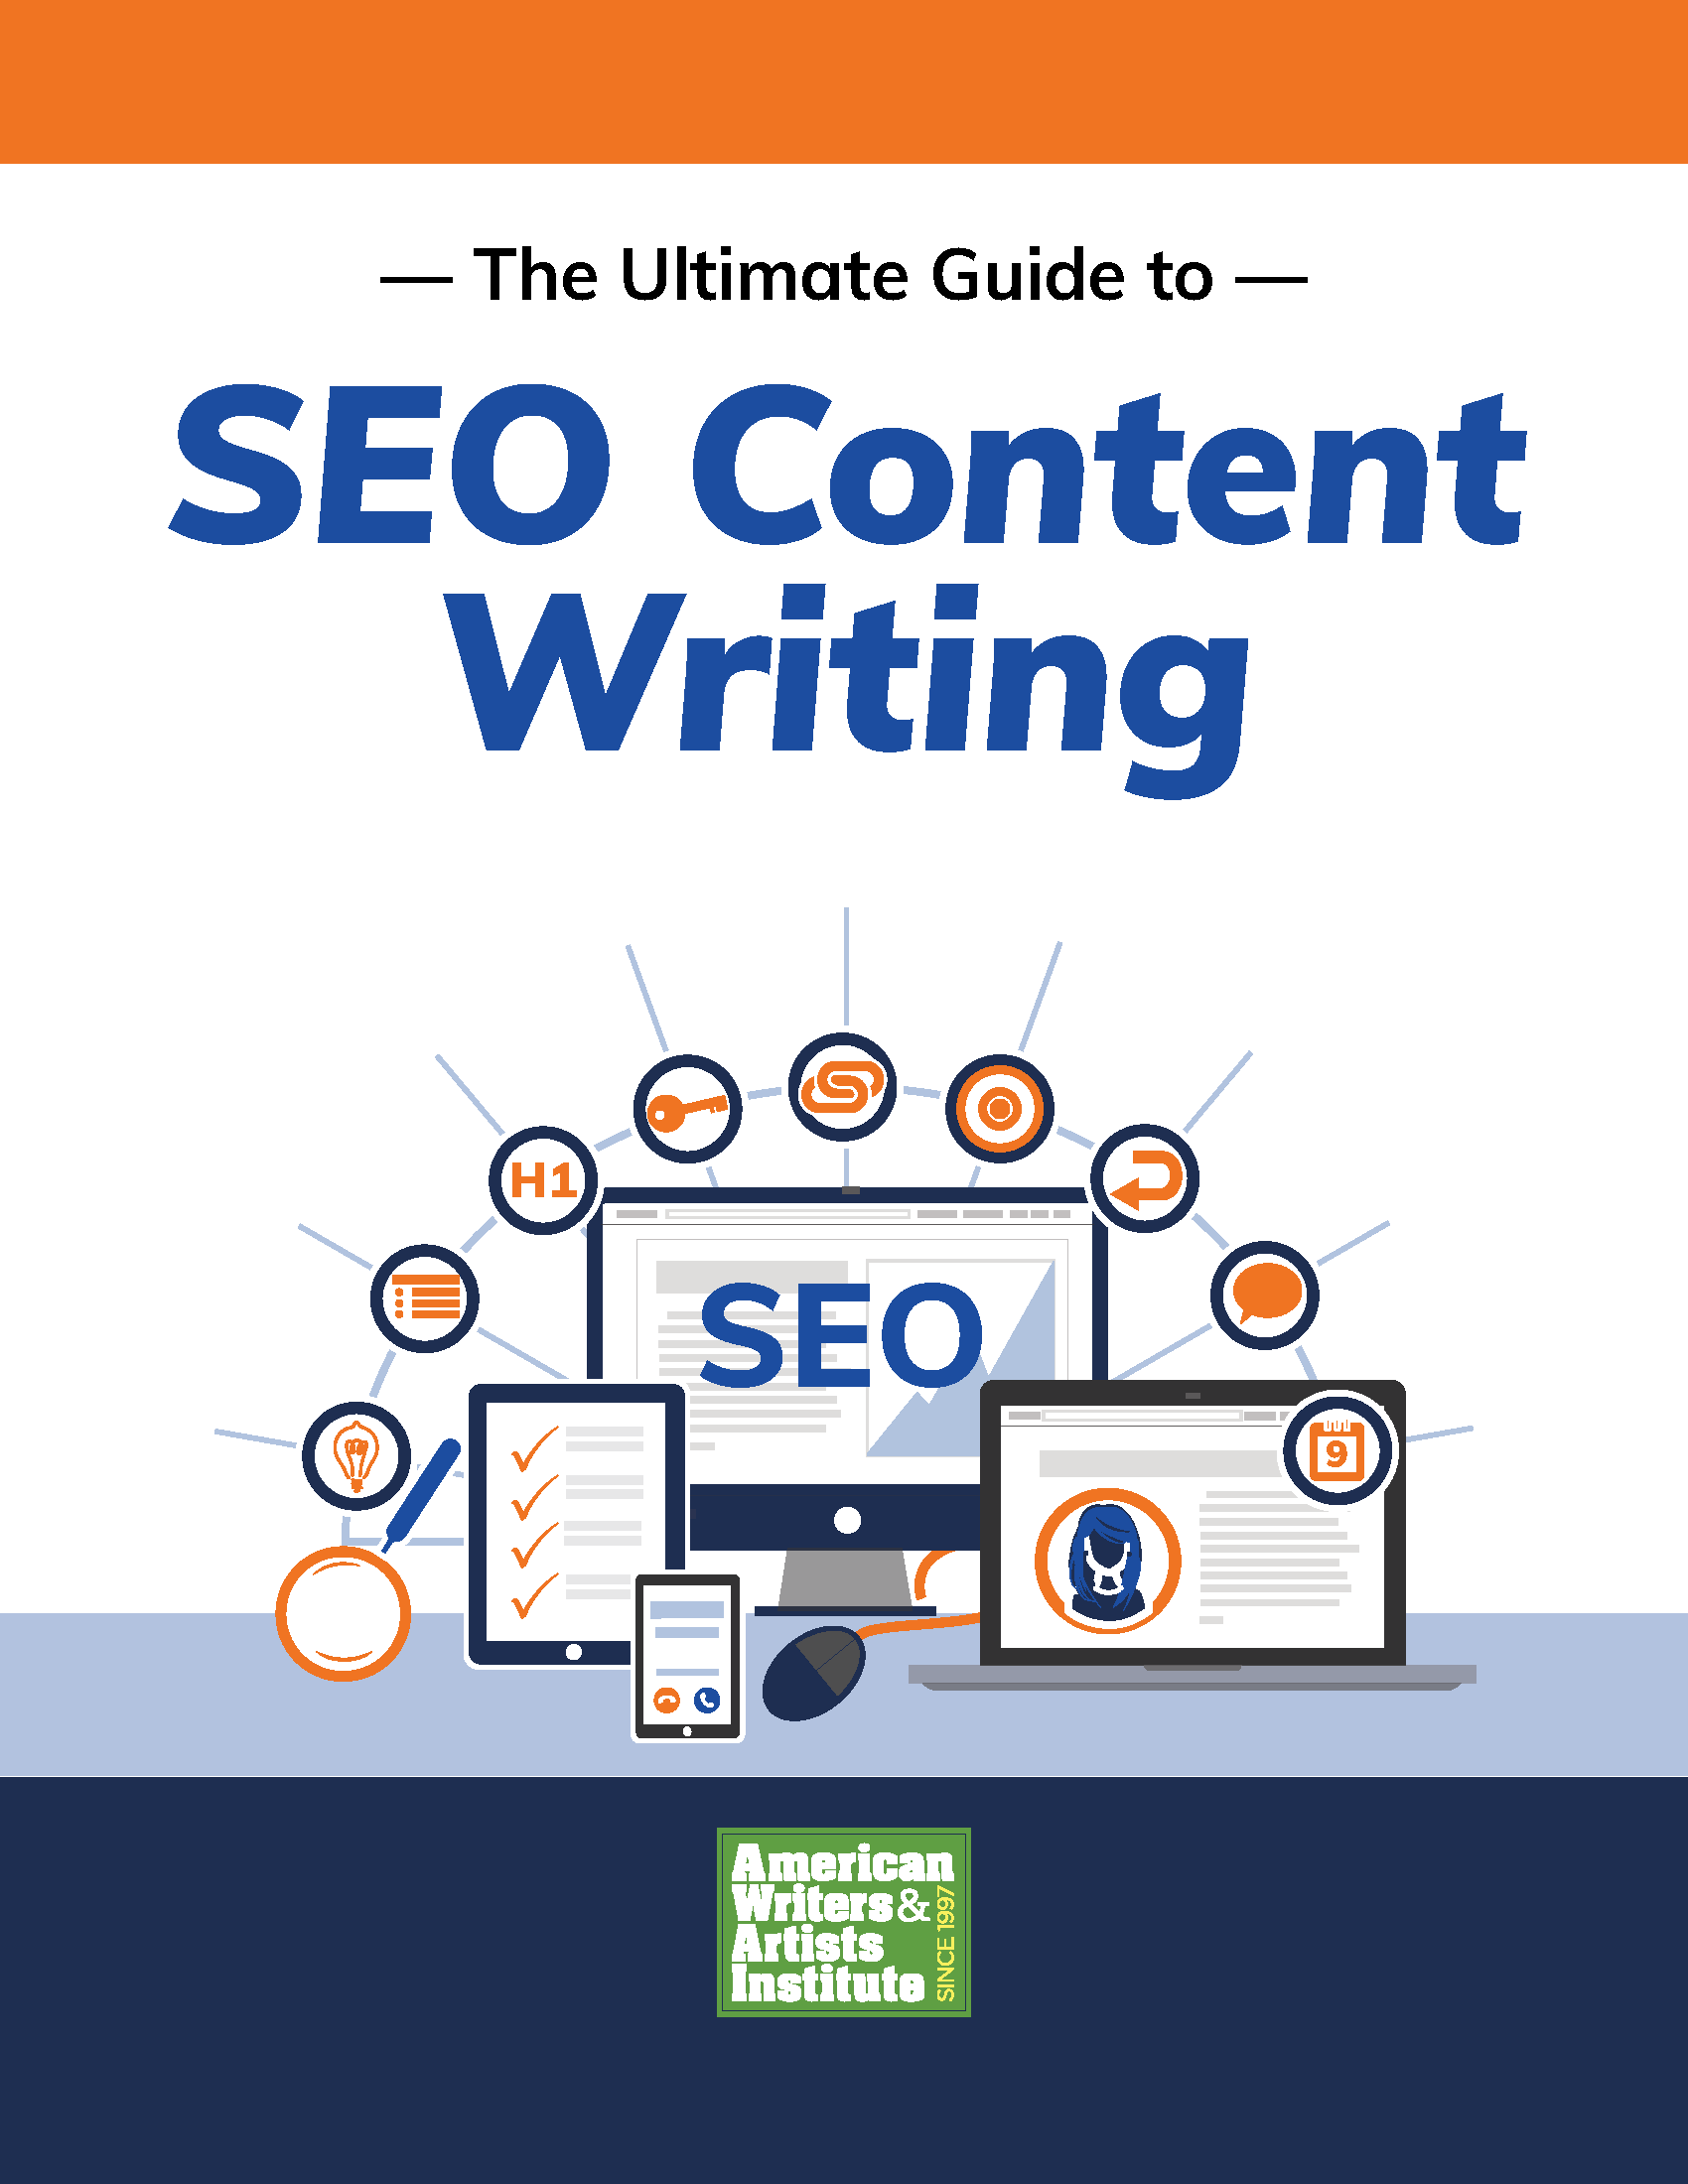 The Ultimate Guide to SEO Content Writing